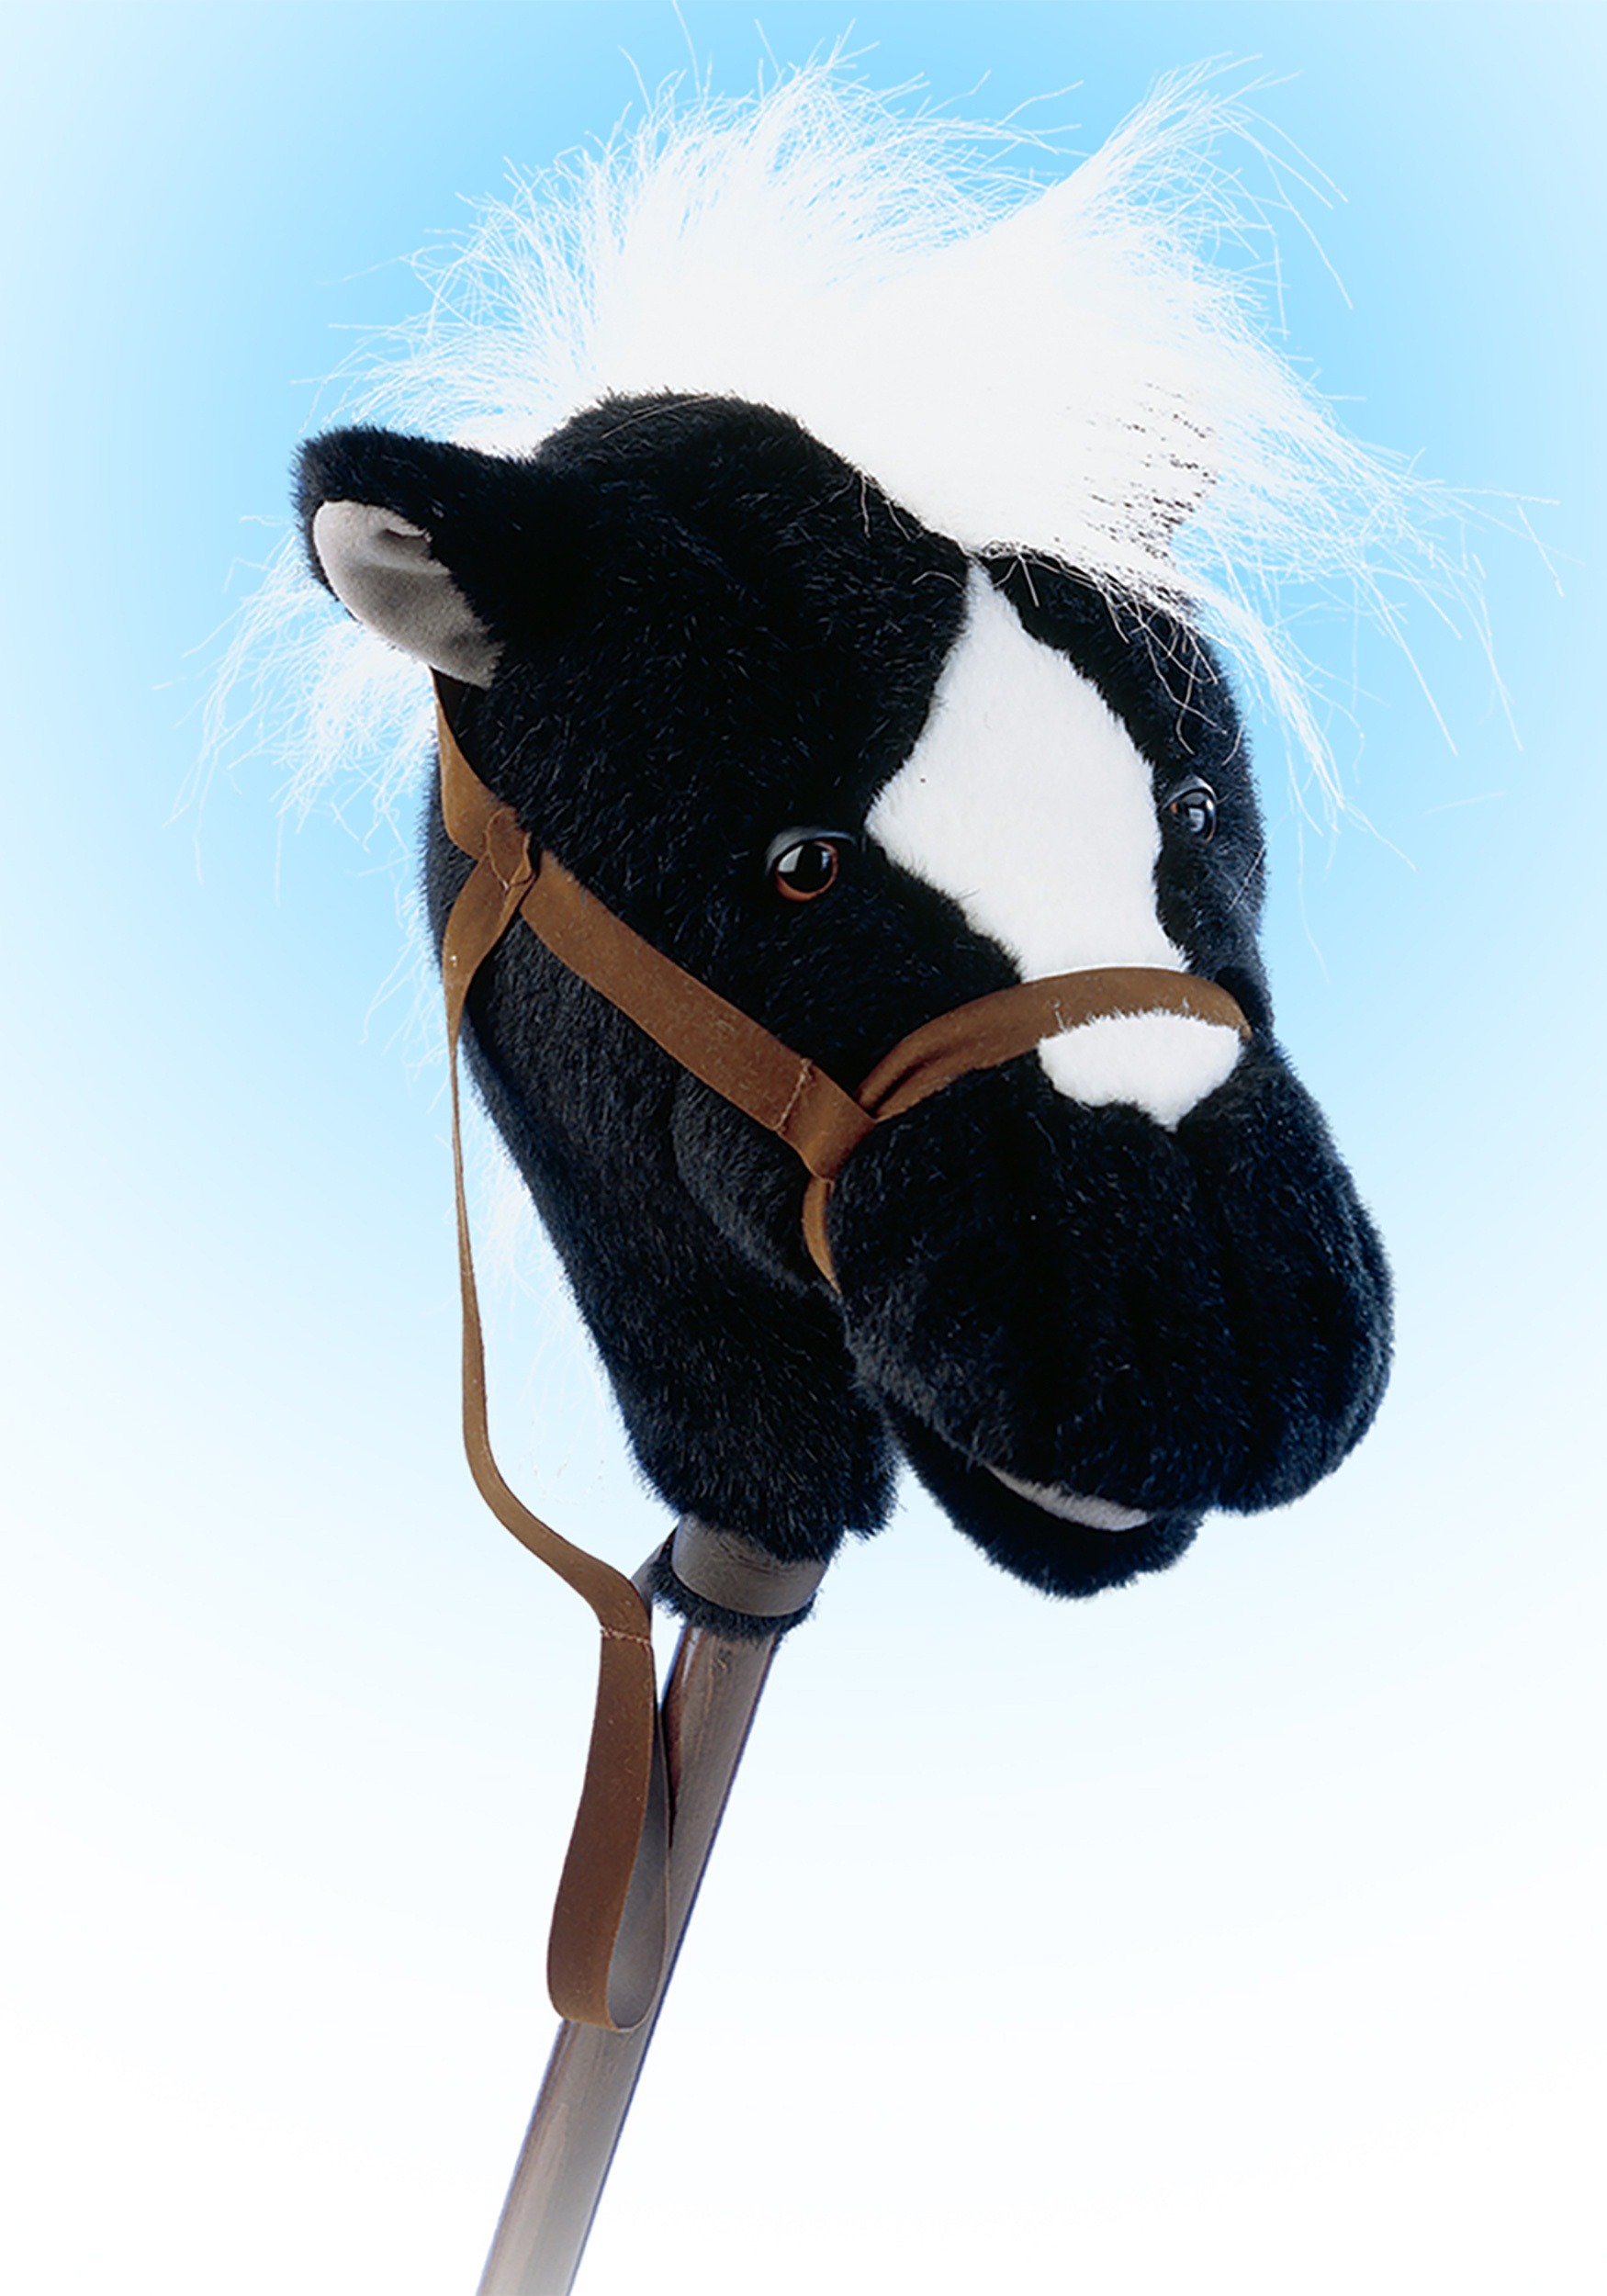 33 Inch Black Toy Horse on a Stick